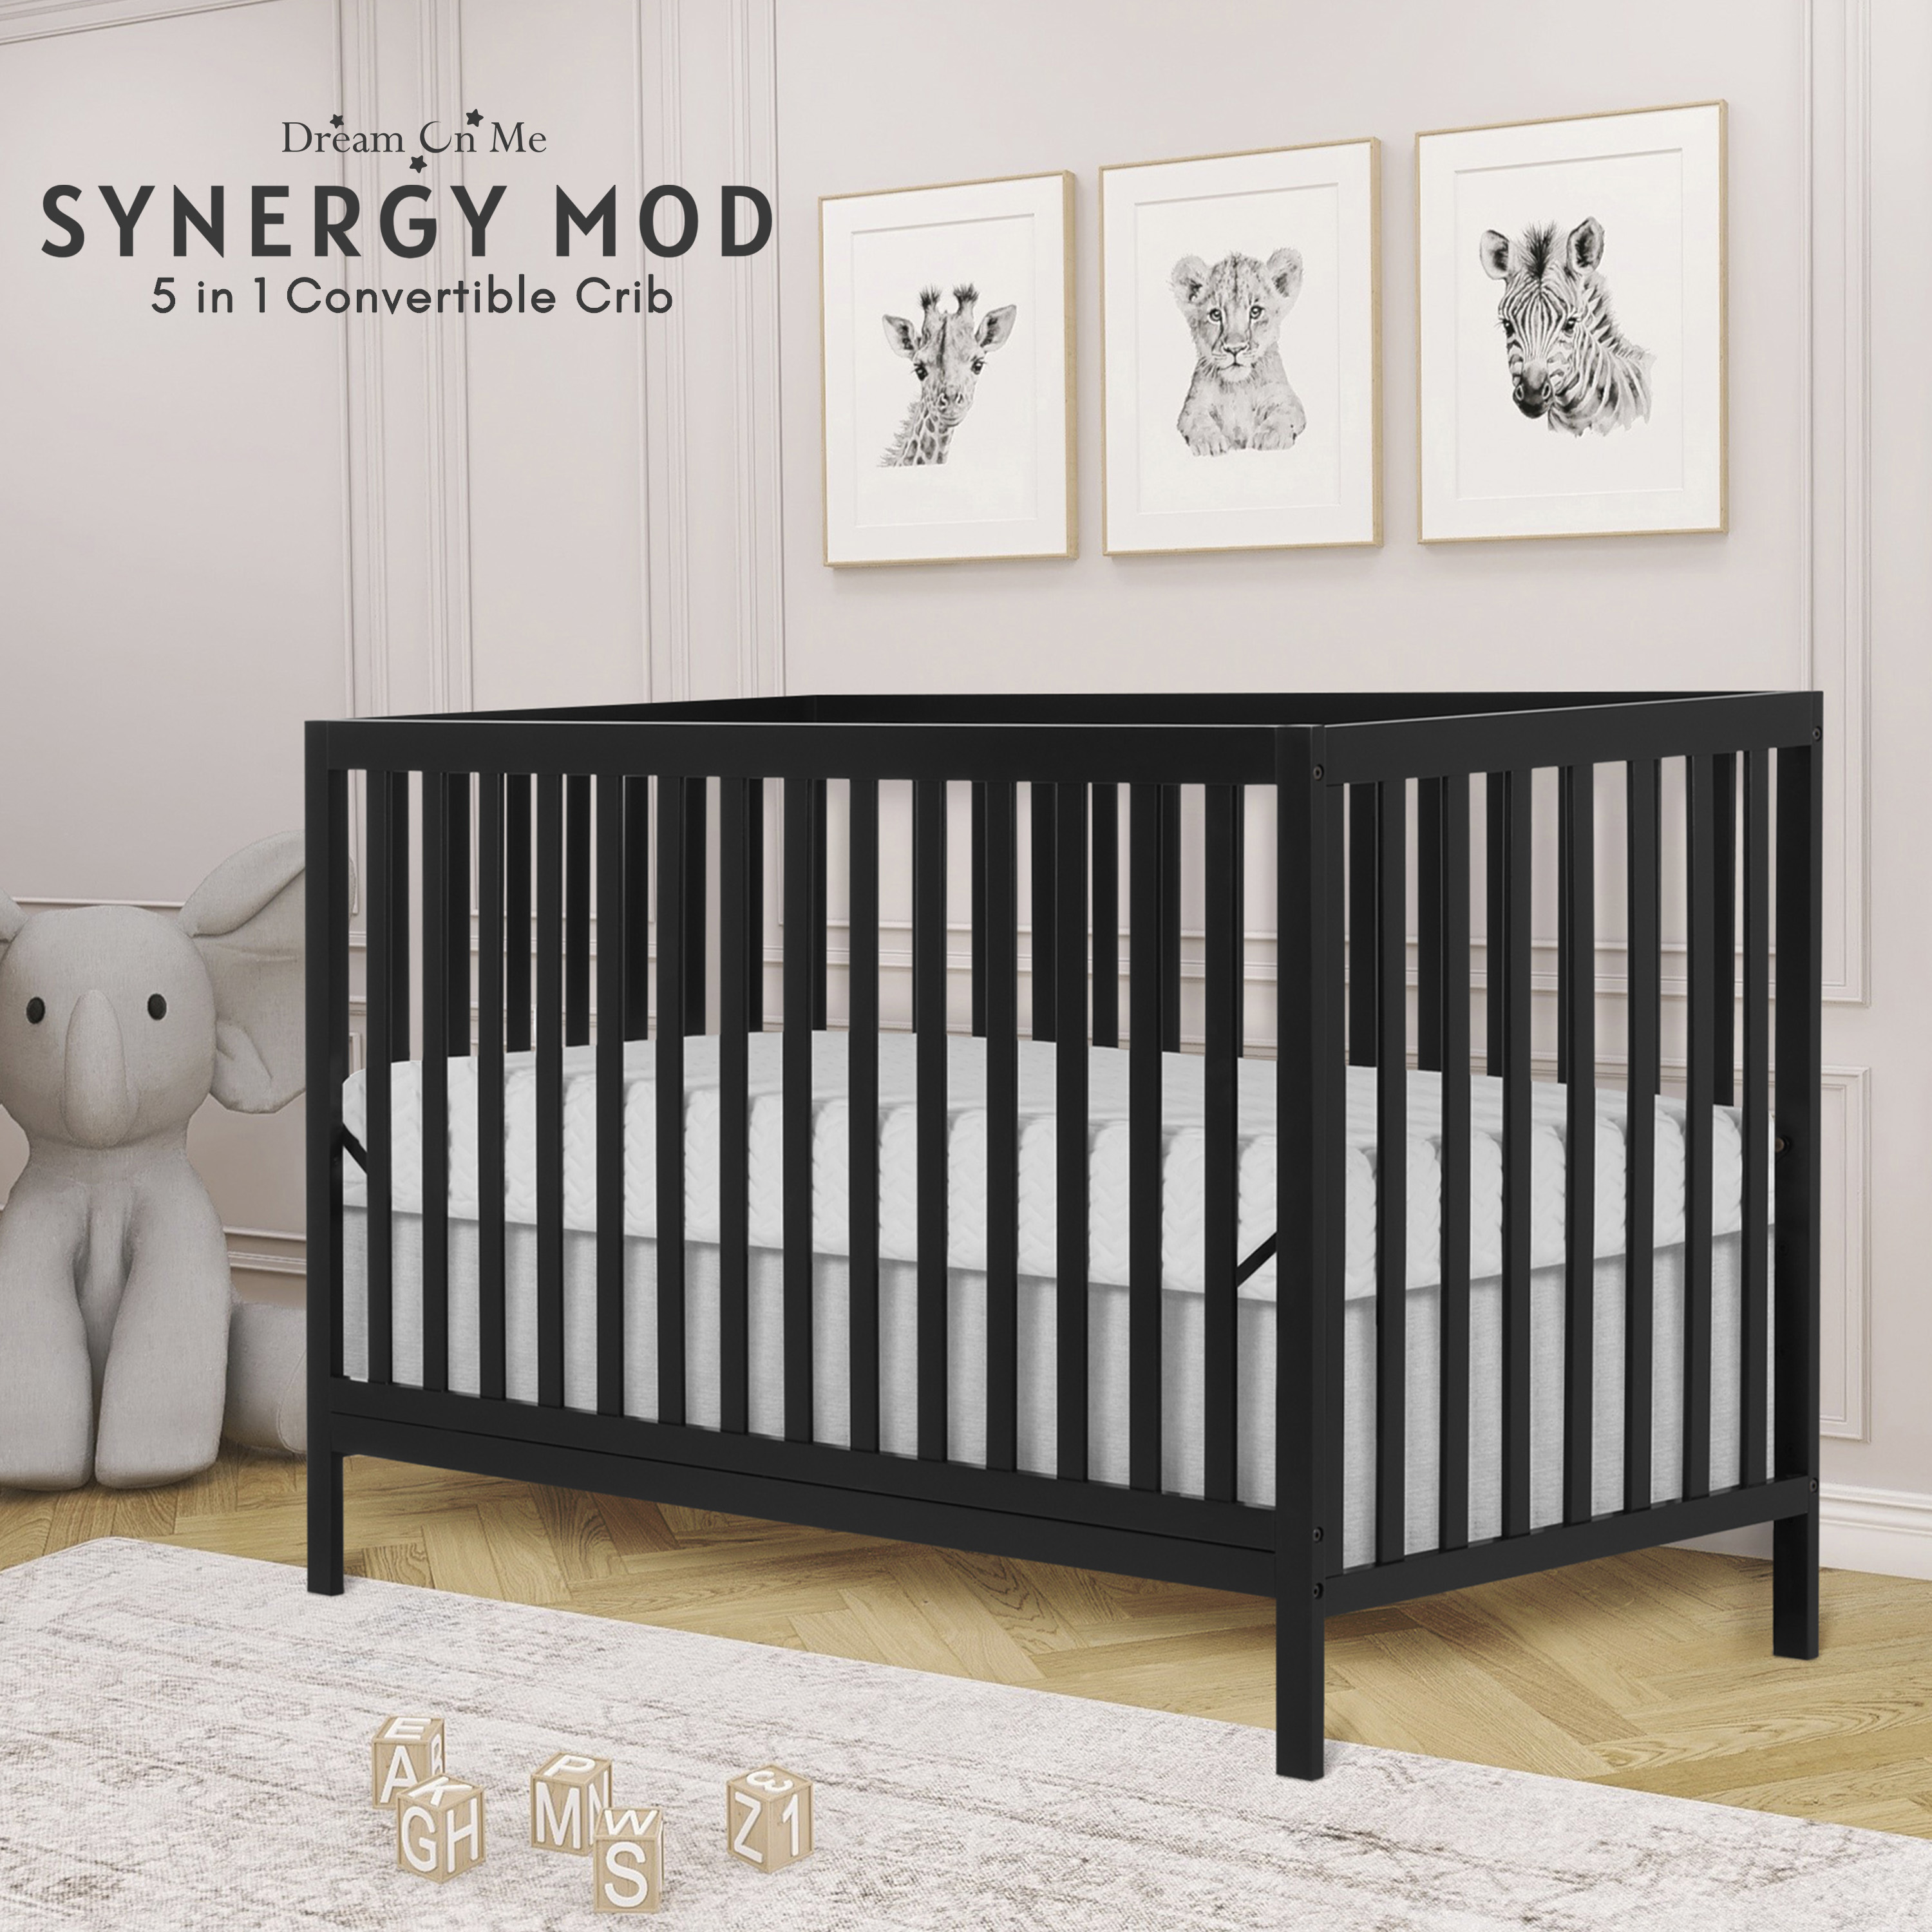 Dream On Me Synergy MOD Crib, Made with Sustainable New Zealand Pinewood, Matte Black - image 3 of 9